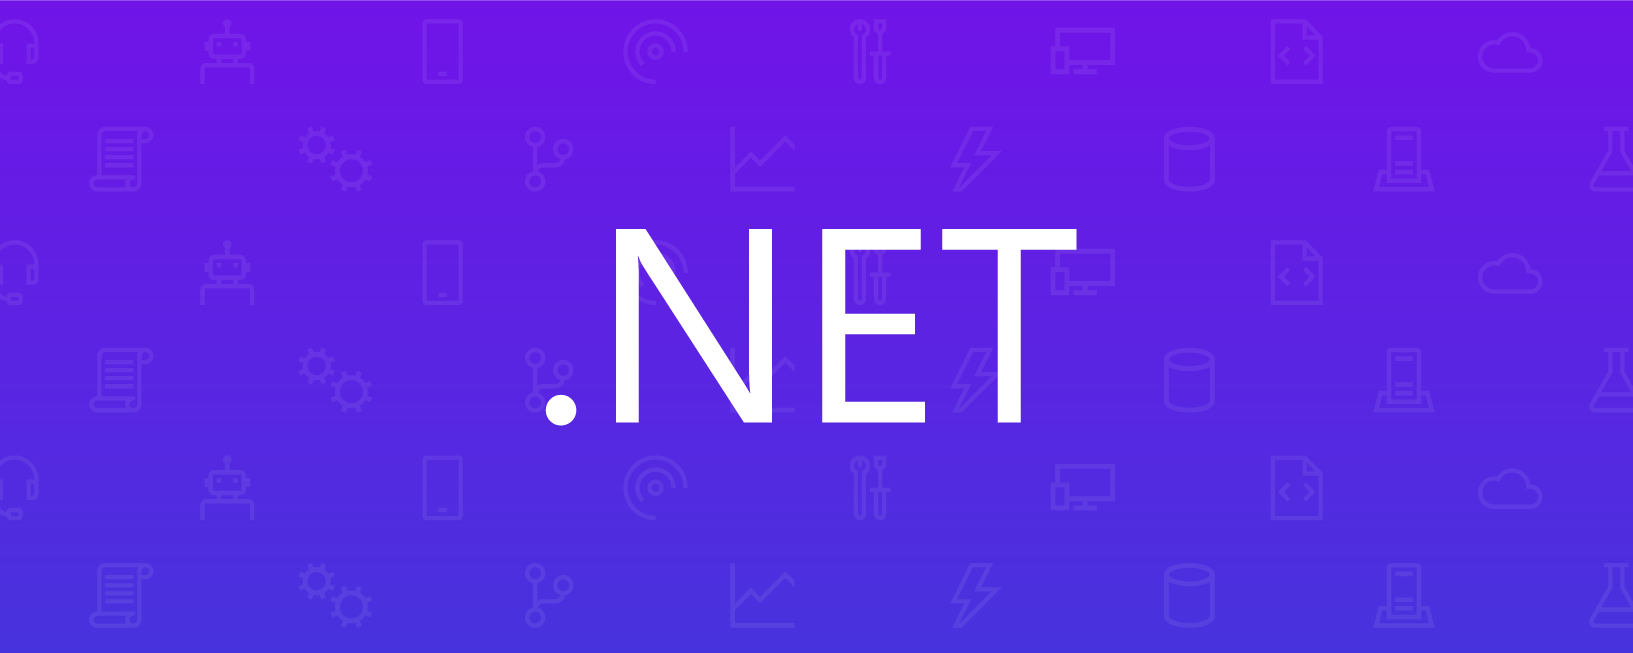 Microsoft .NET 5 aims to unify the .NET Framework and .NET Core